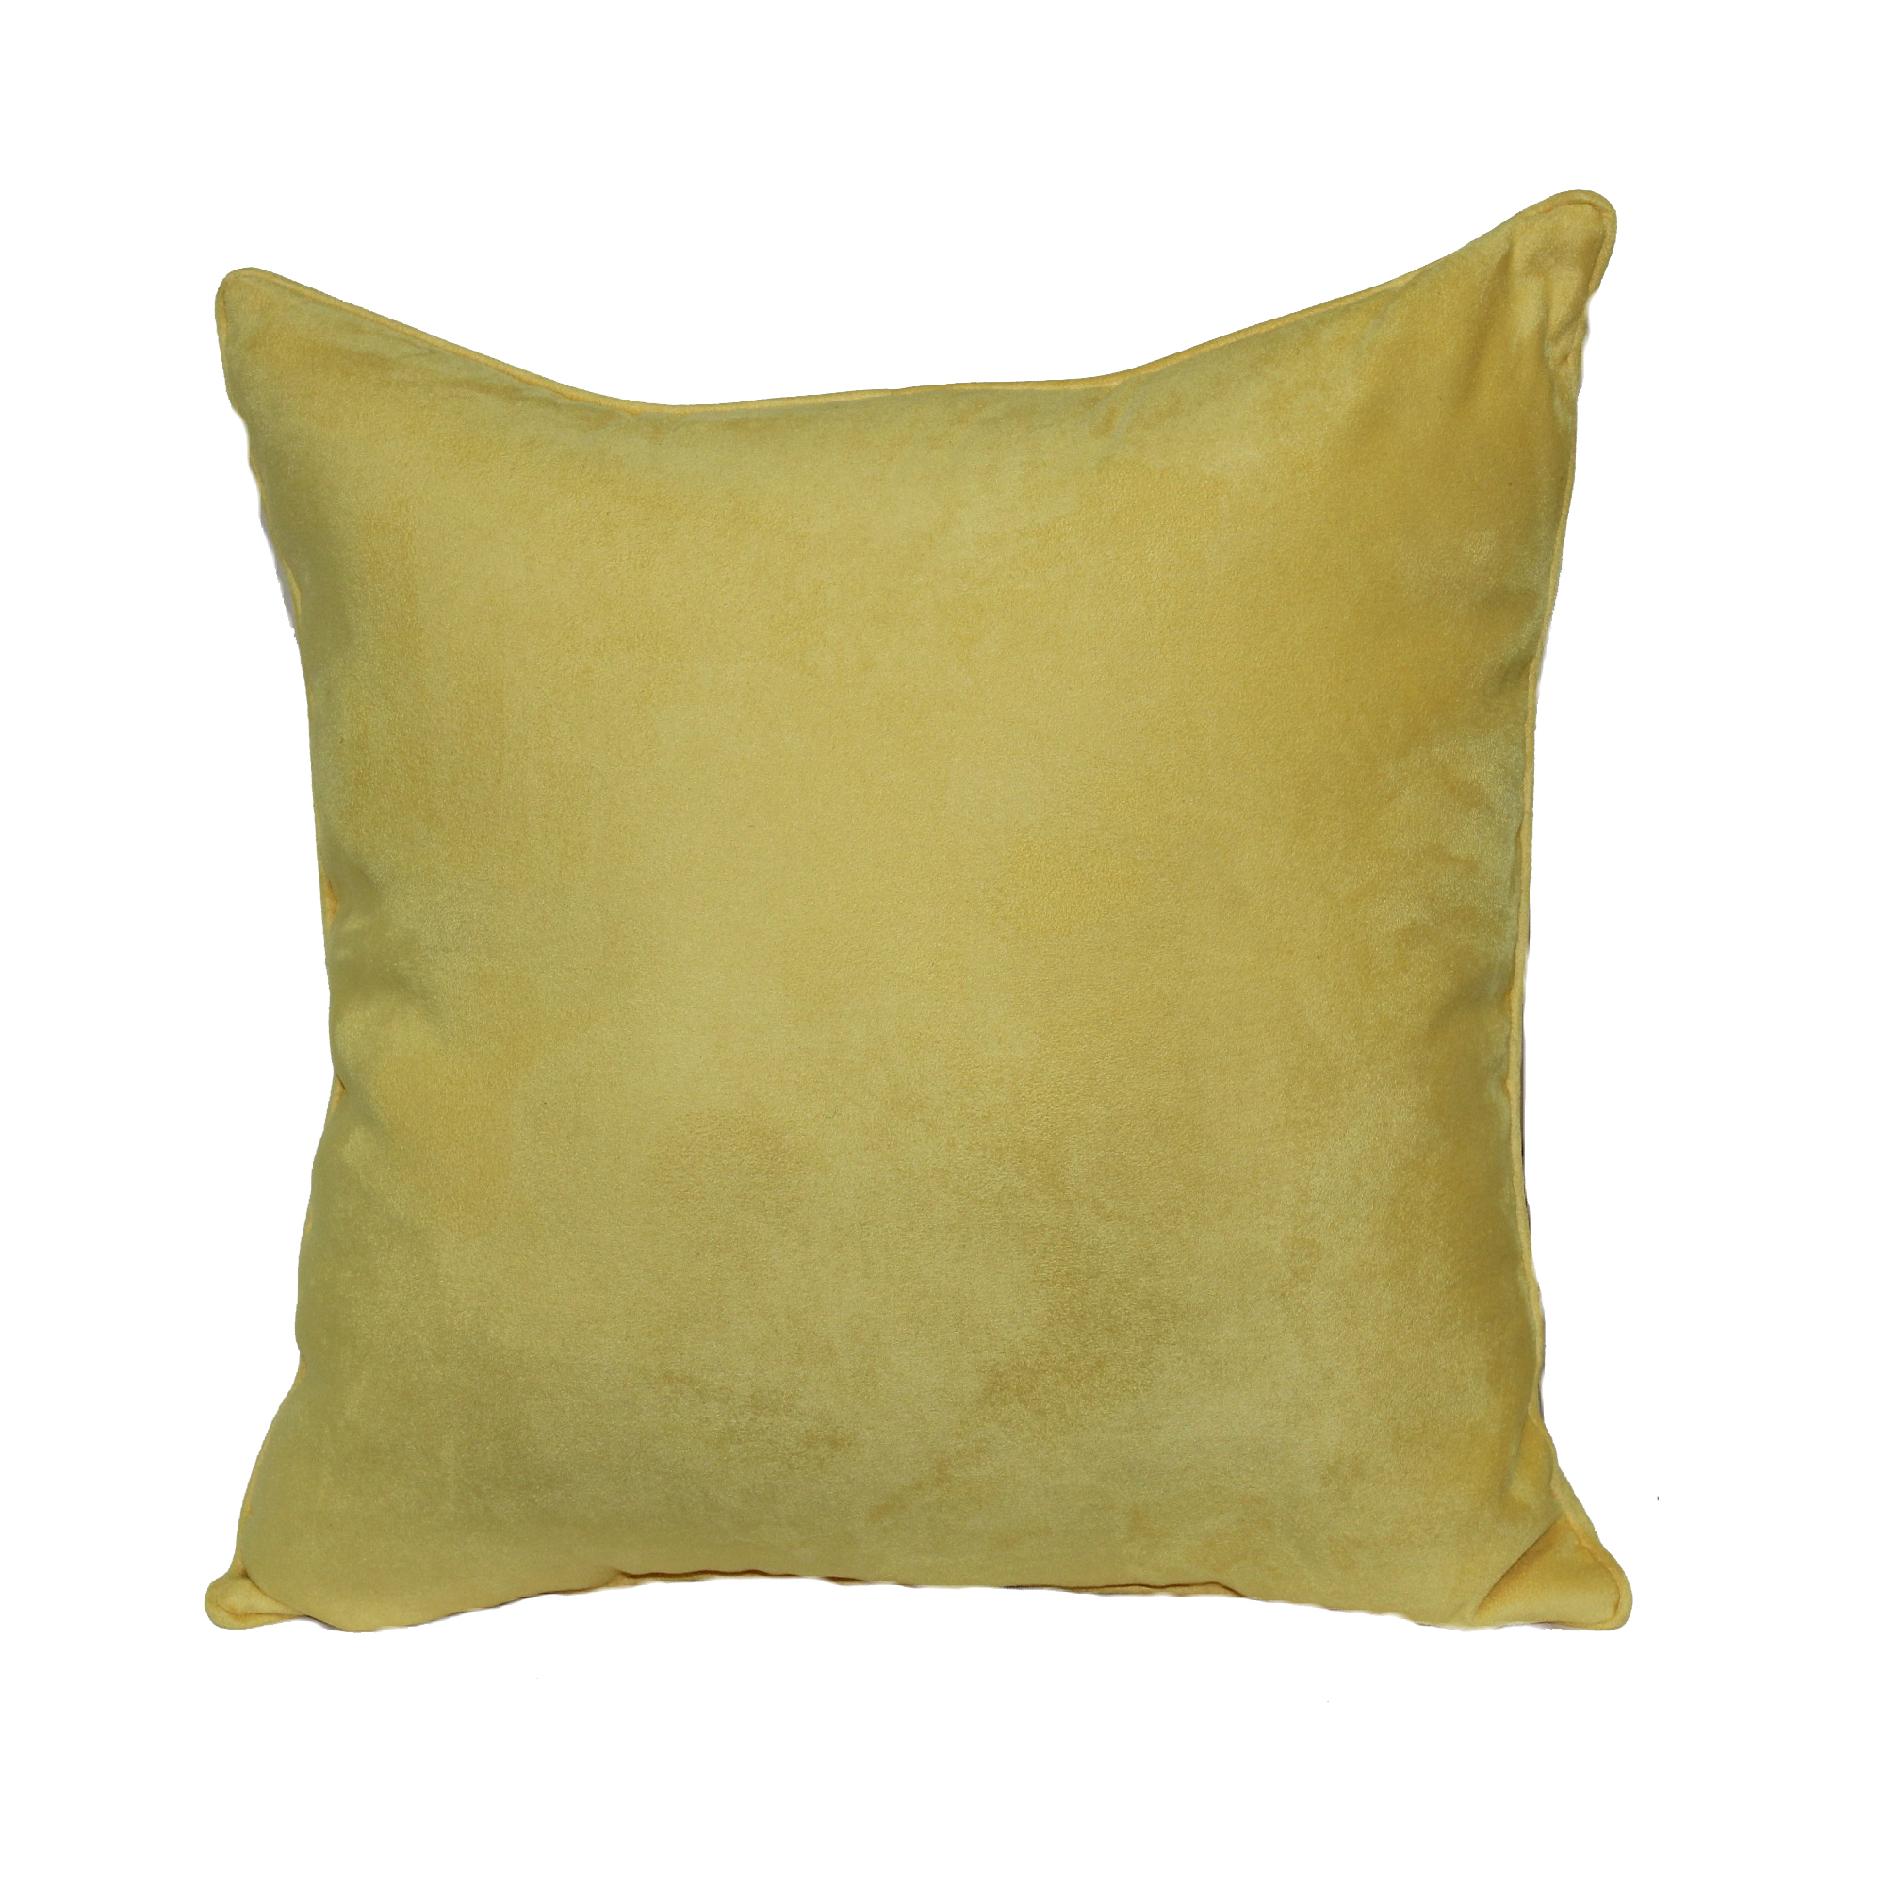 Brentwood Originals 7650 Avalon Pillow 13 by 20-Inch Gold 